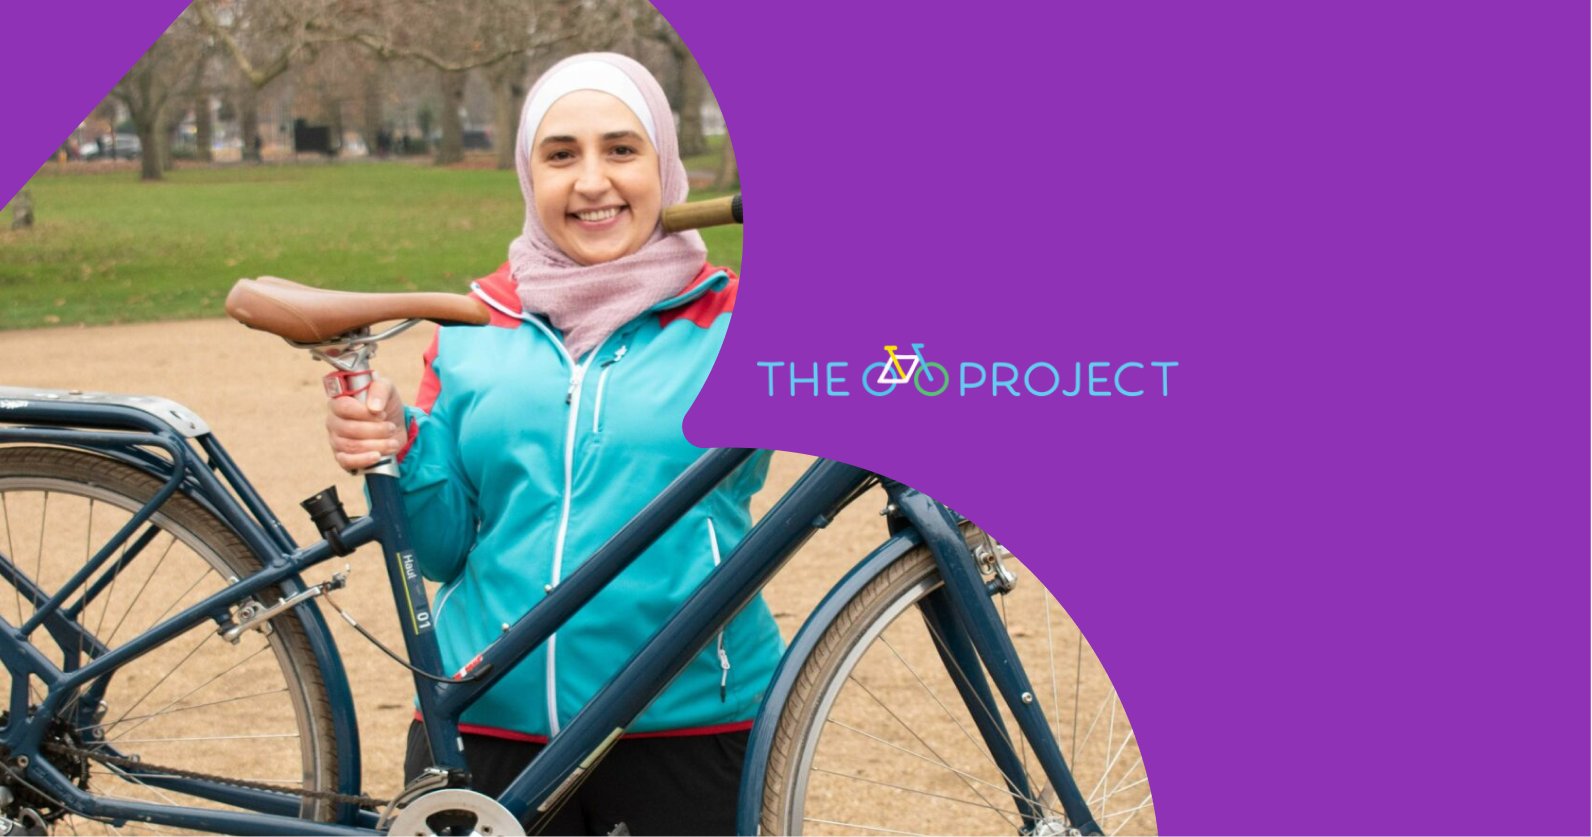 The Bike Project customer story with a picture of a person holding a bike.